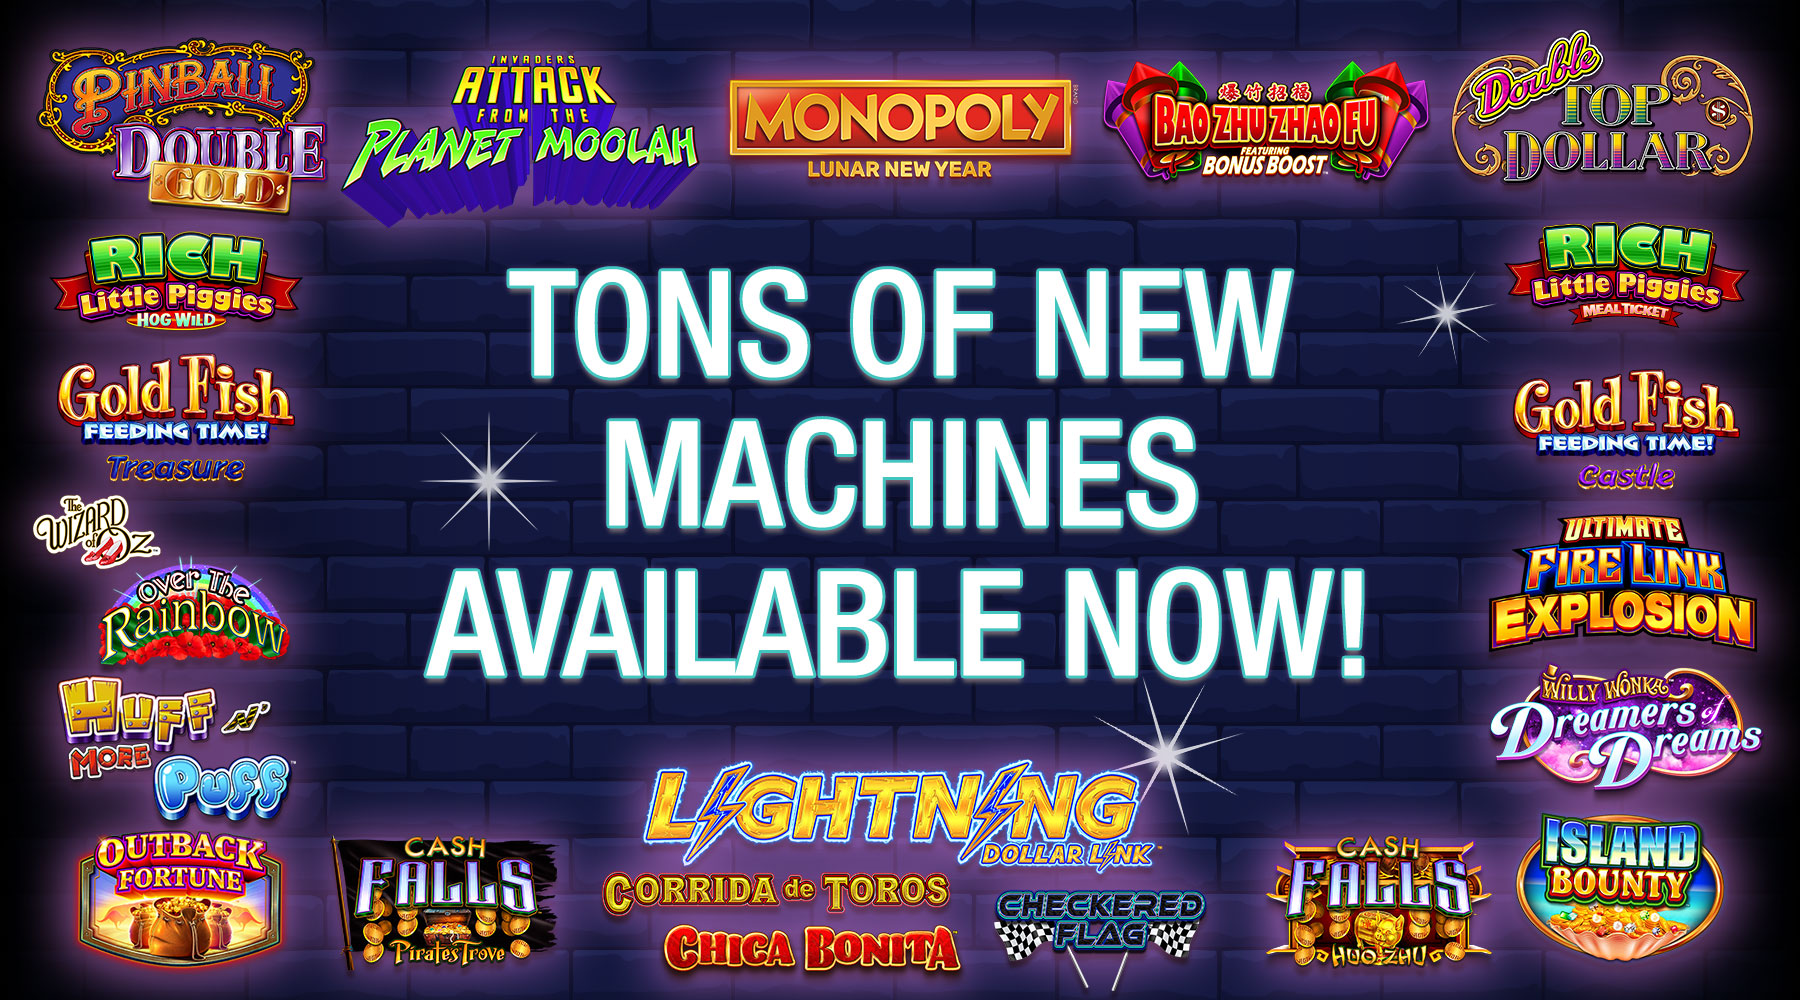 New Slot machines available NOW at Oxford Casino Hotel!